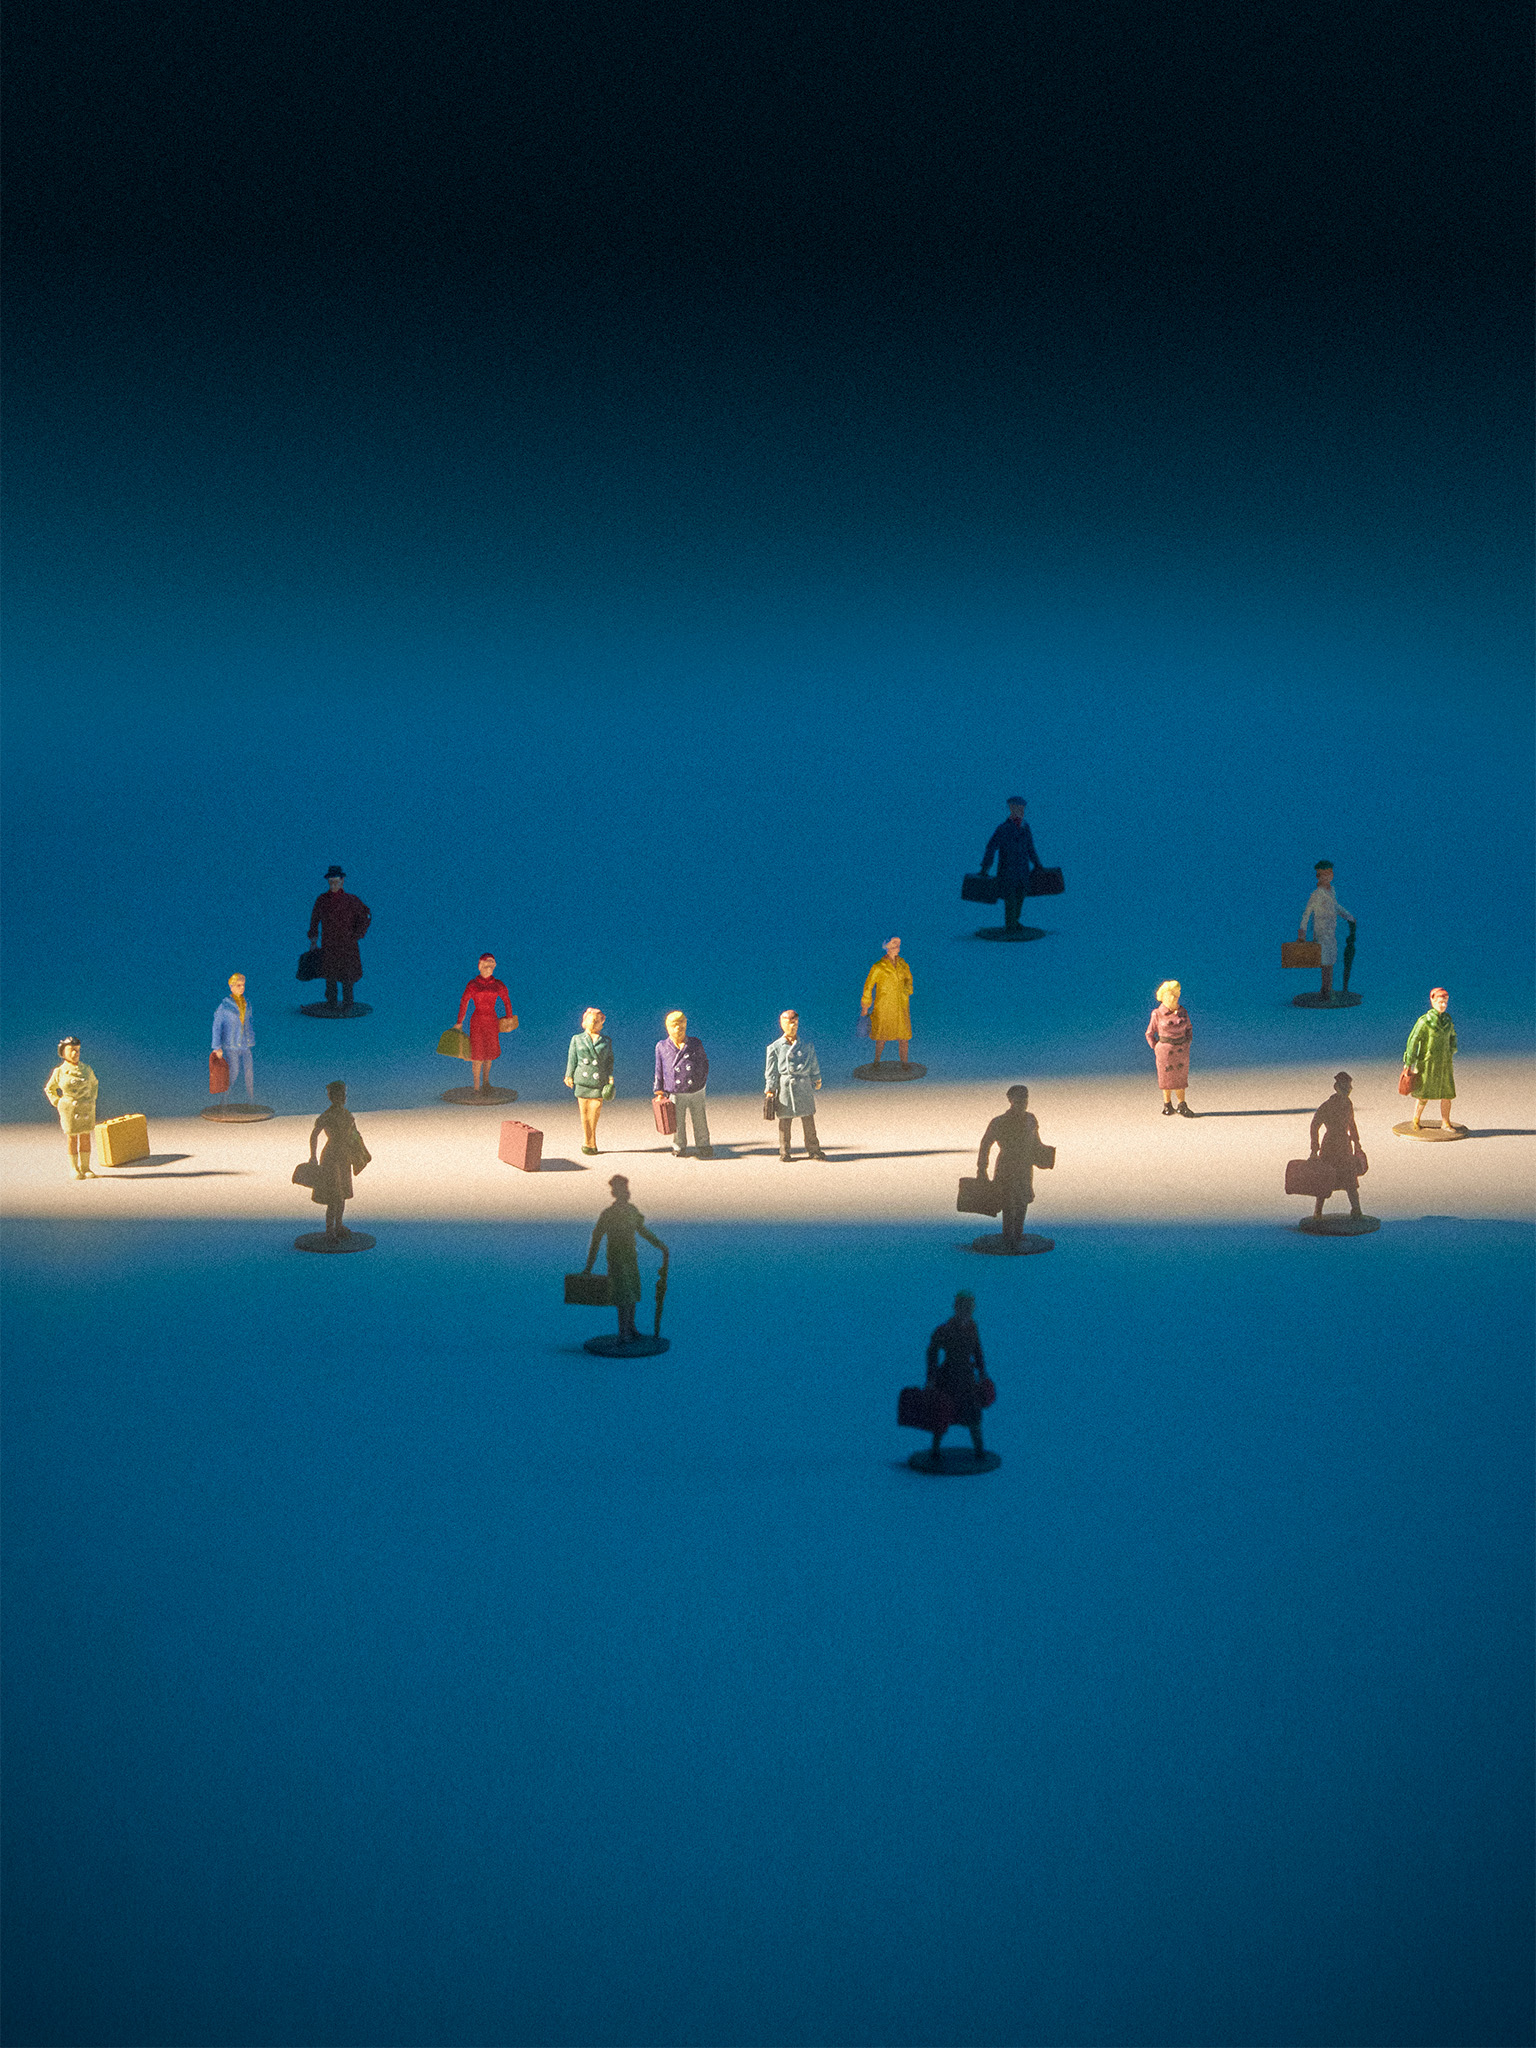 tiny figurines of travellers with luggage in a beam of light on a blue background 